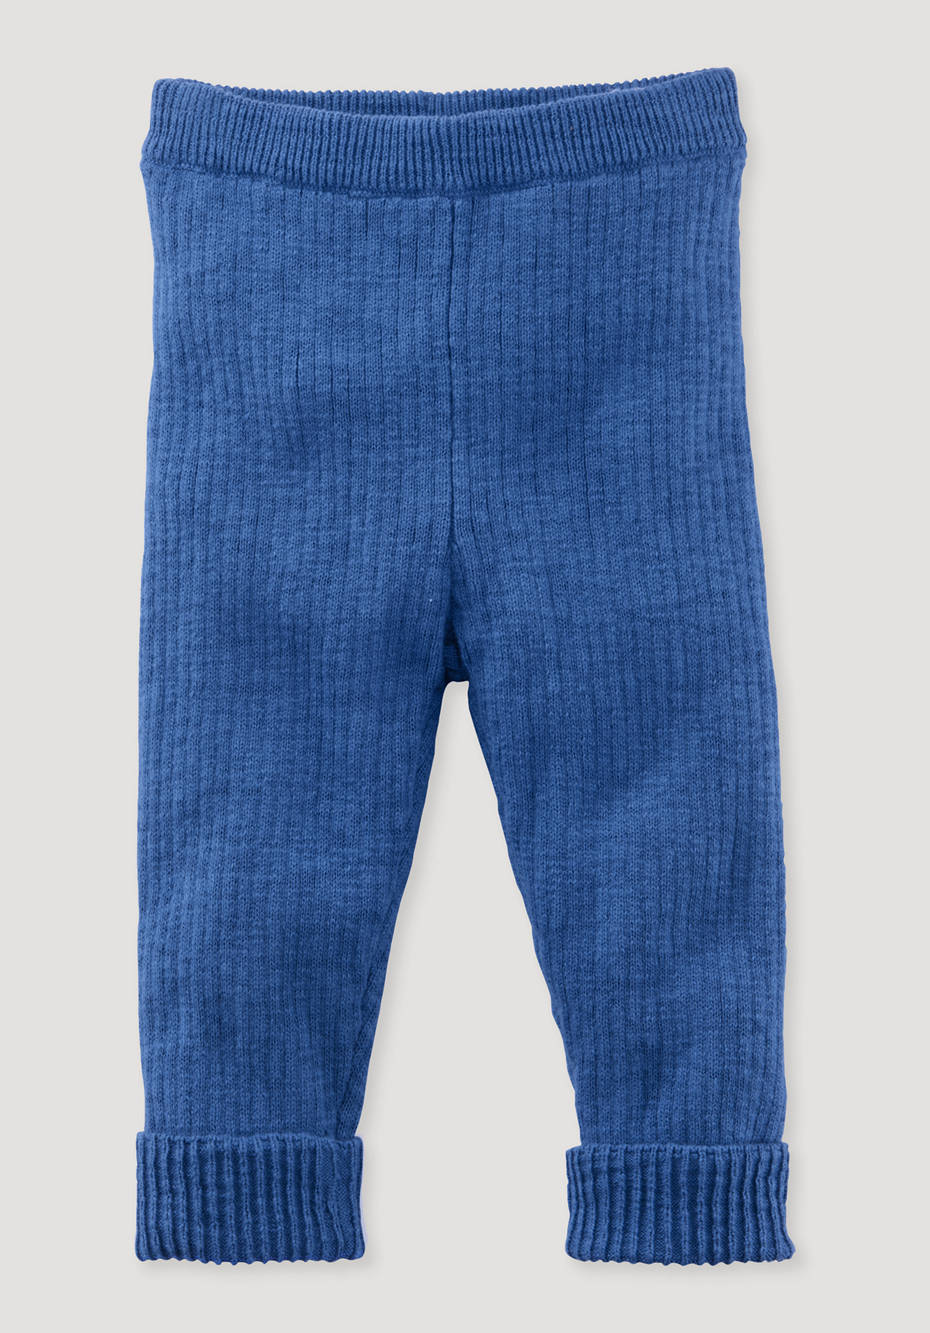 Knit leggings made from pure organic cotton